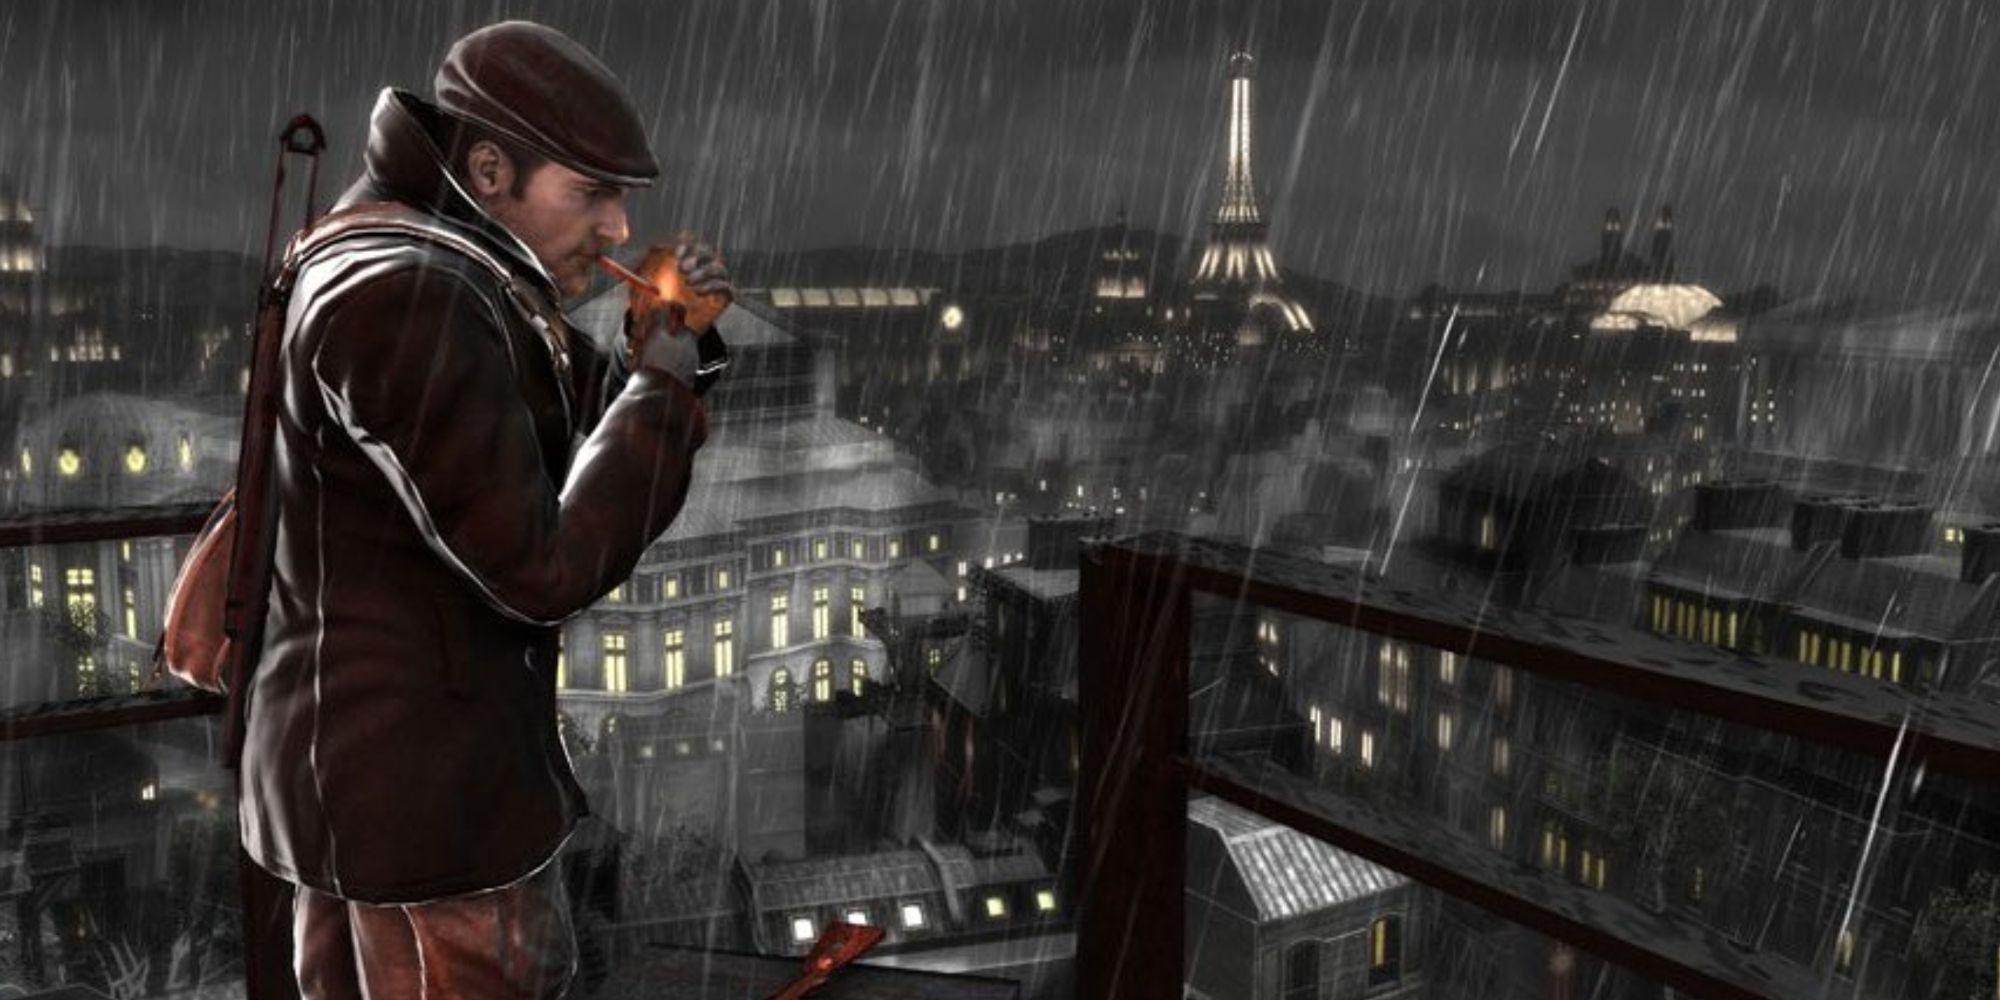 Sean Devlin lights a cigarette atop a rooftop overlooking the Eiffel Tower in Paris in The Saboteur